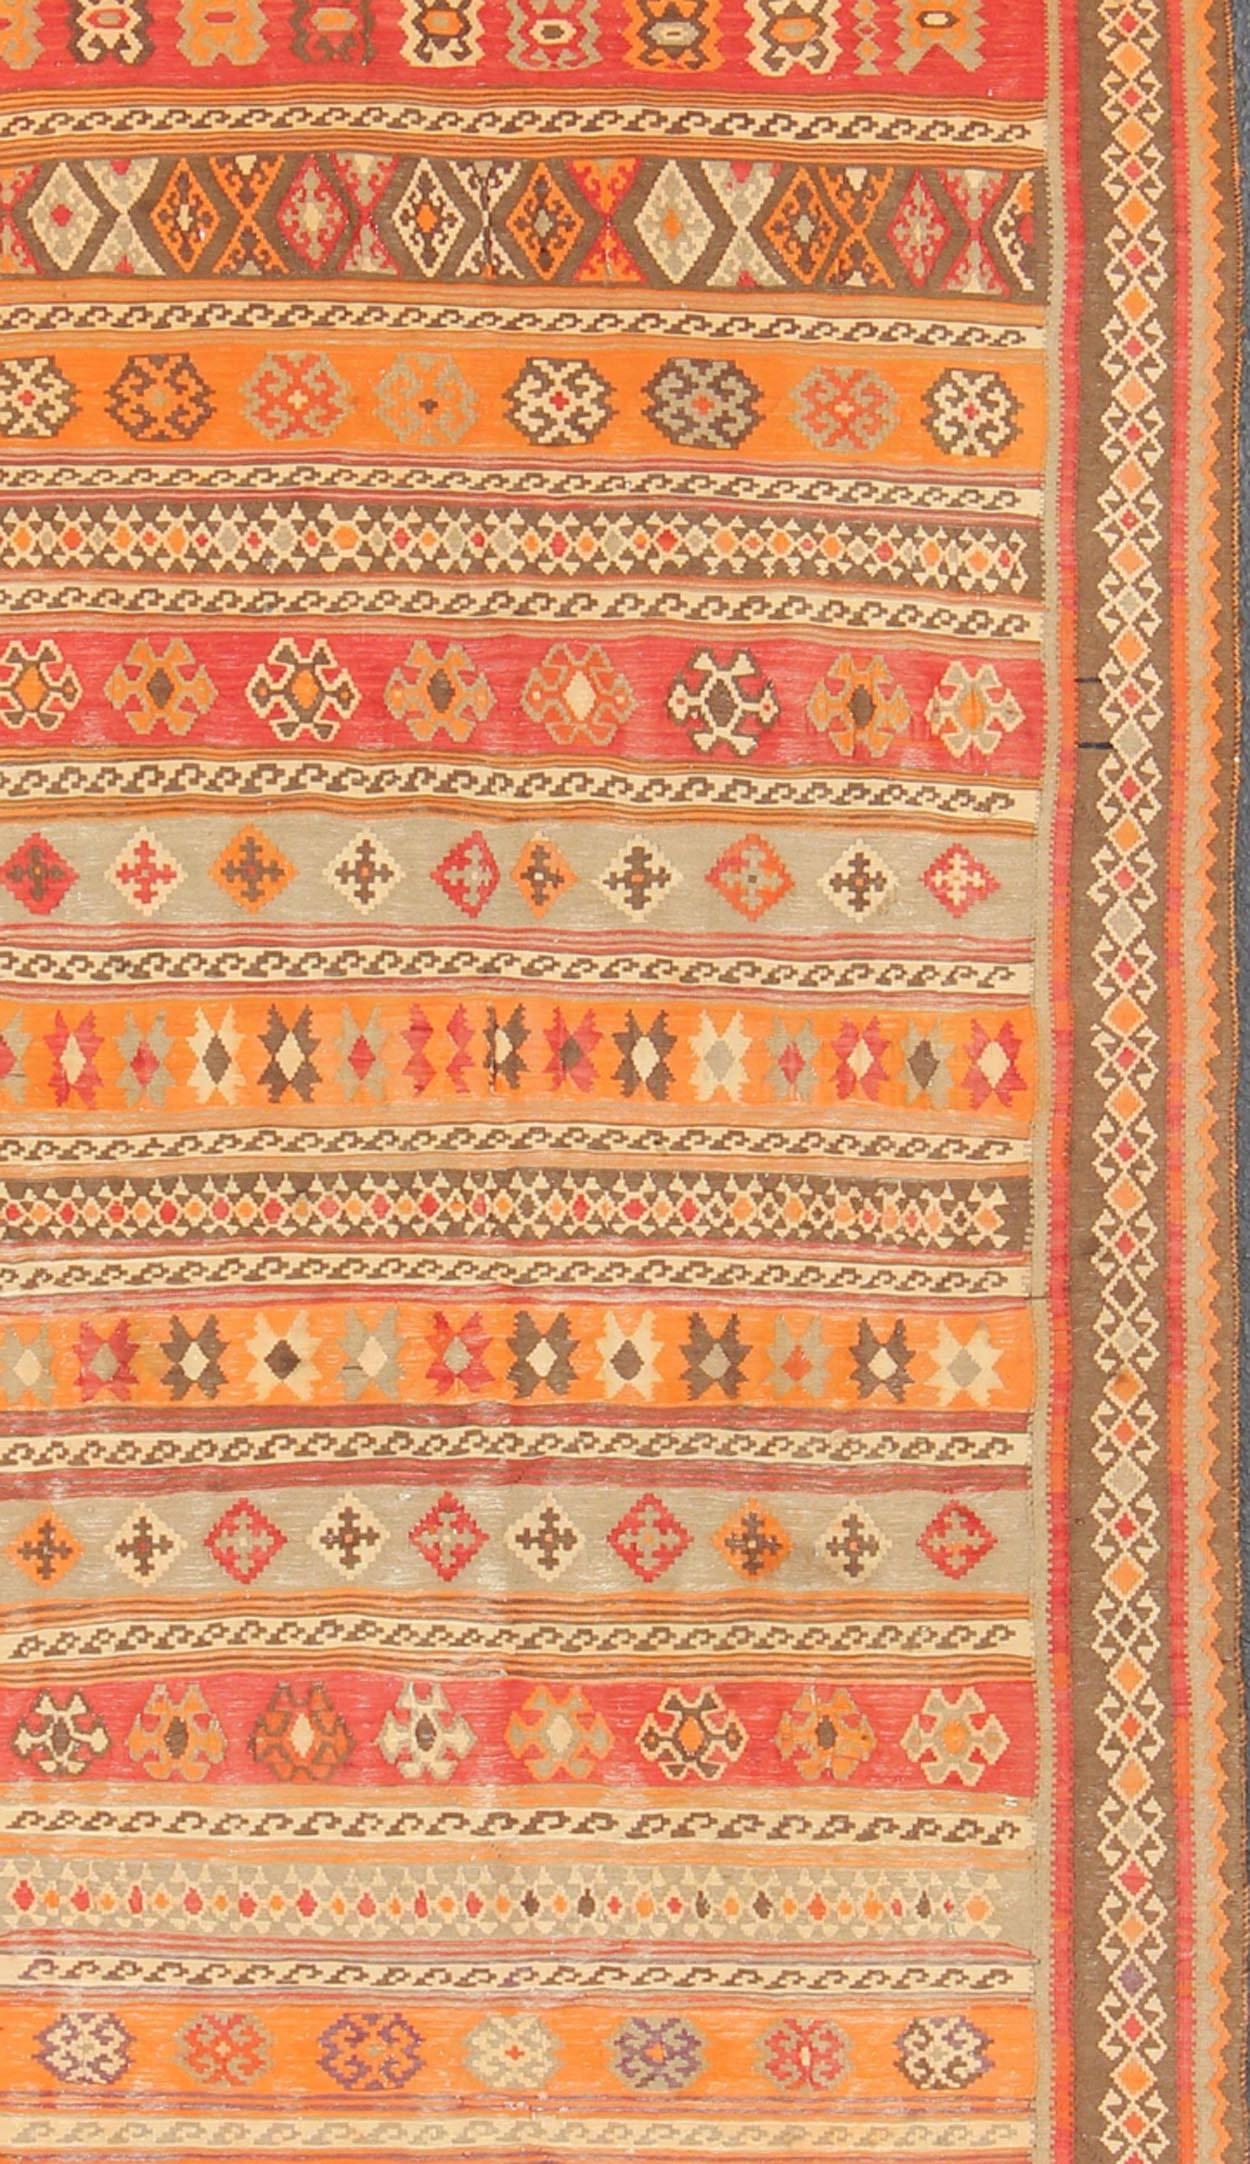 Antique Moroccan Kilim with Embroidery in Red, Orange, Gray and Brown In Good Condition For Sale In Atlanta, GA